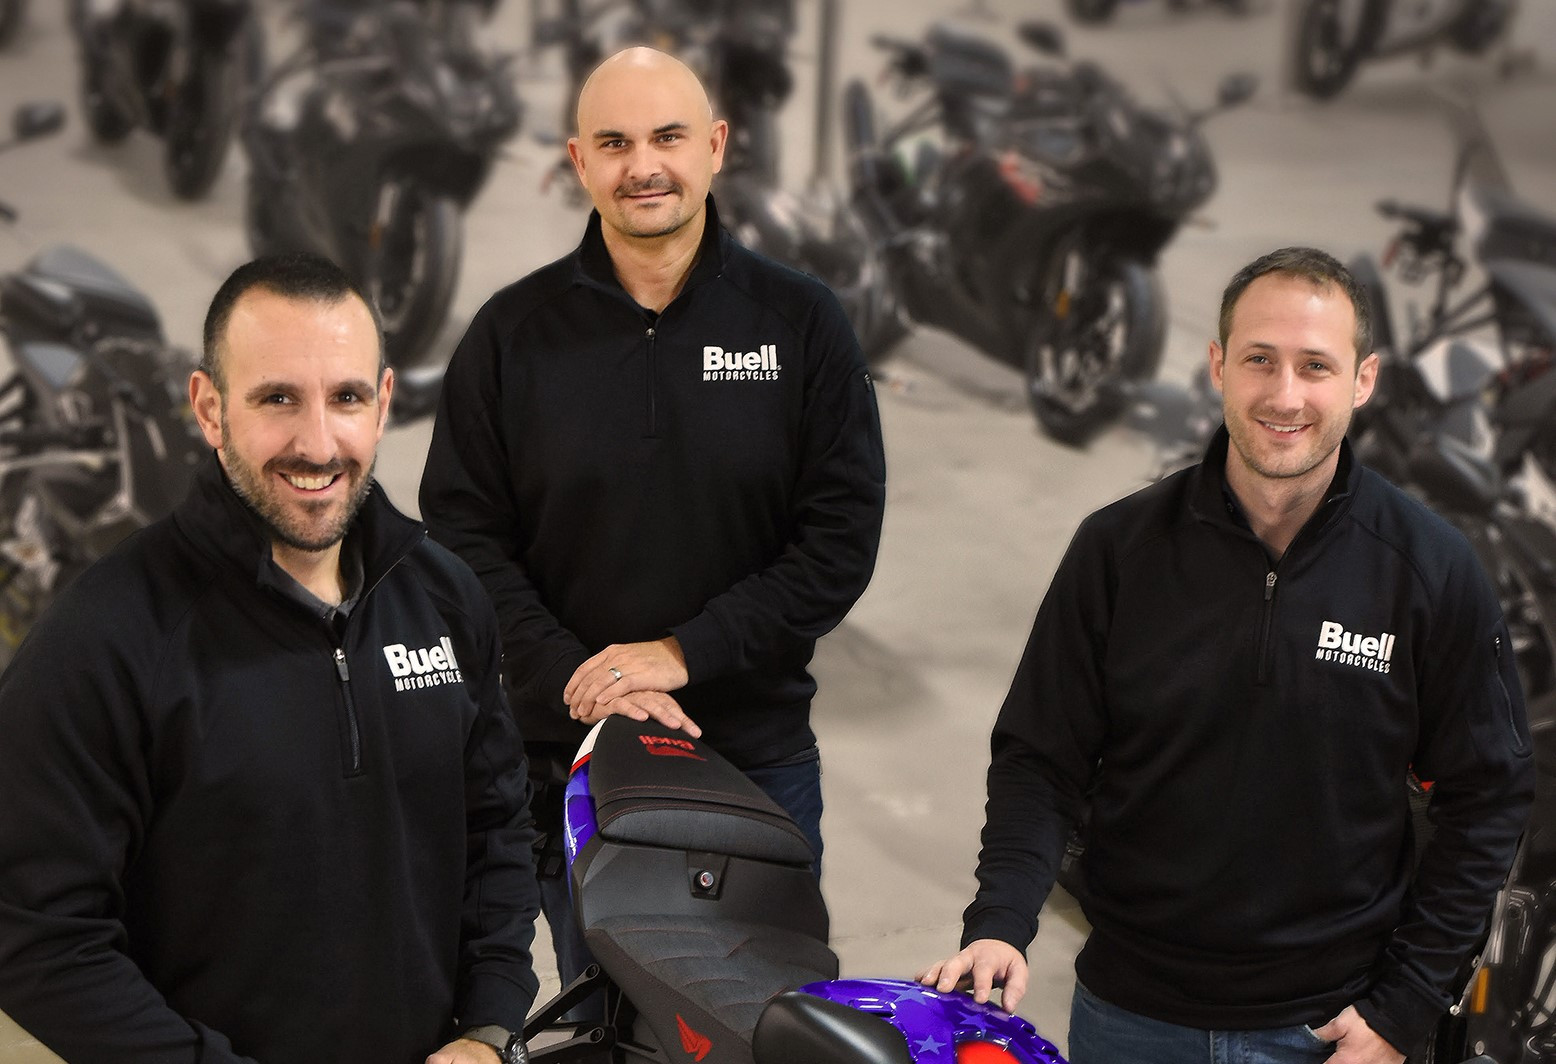 Buell Motorcycles' new hires (from left) Jason Anderson, John Nychypor, and Matt Laurent.